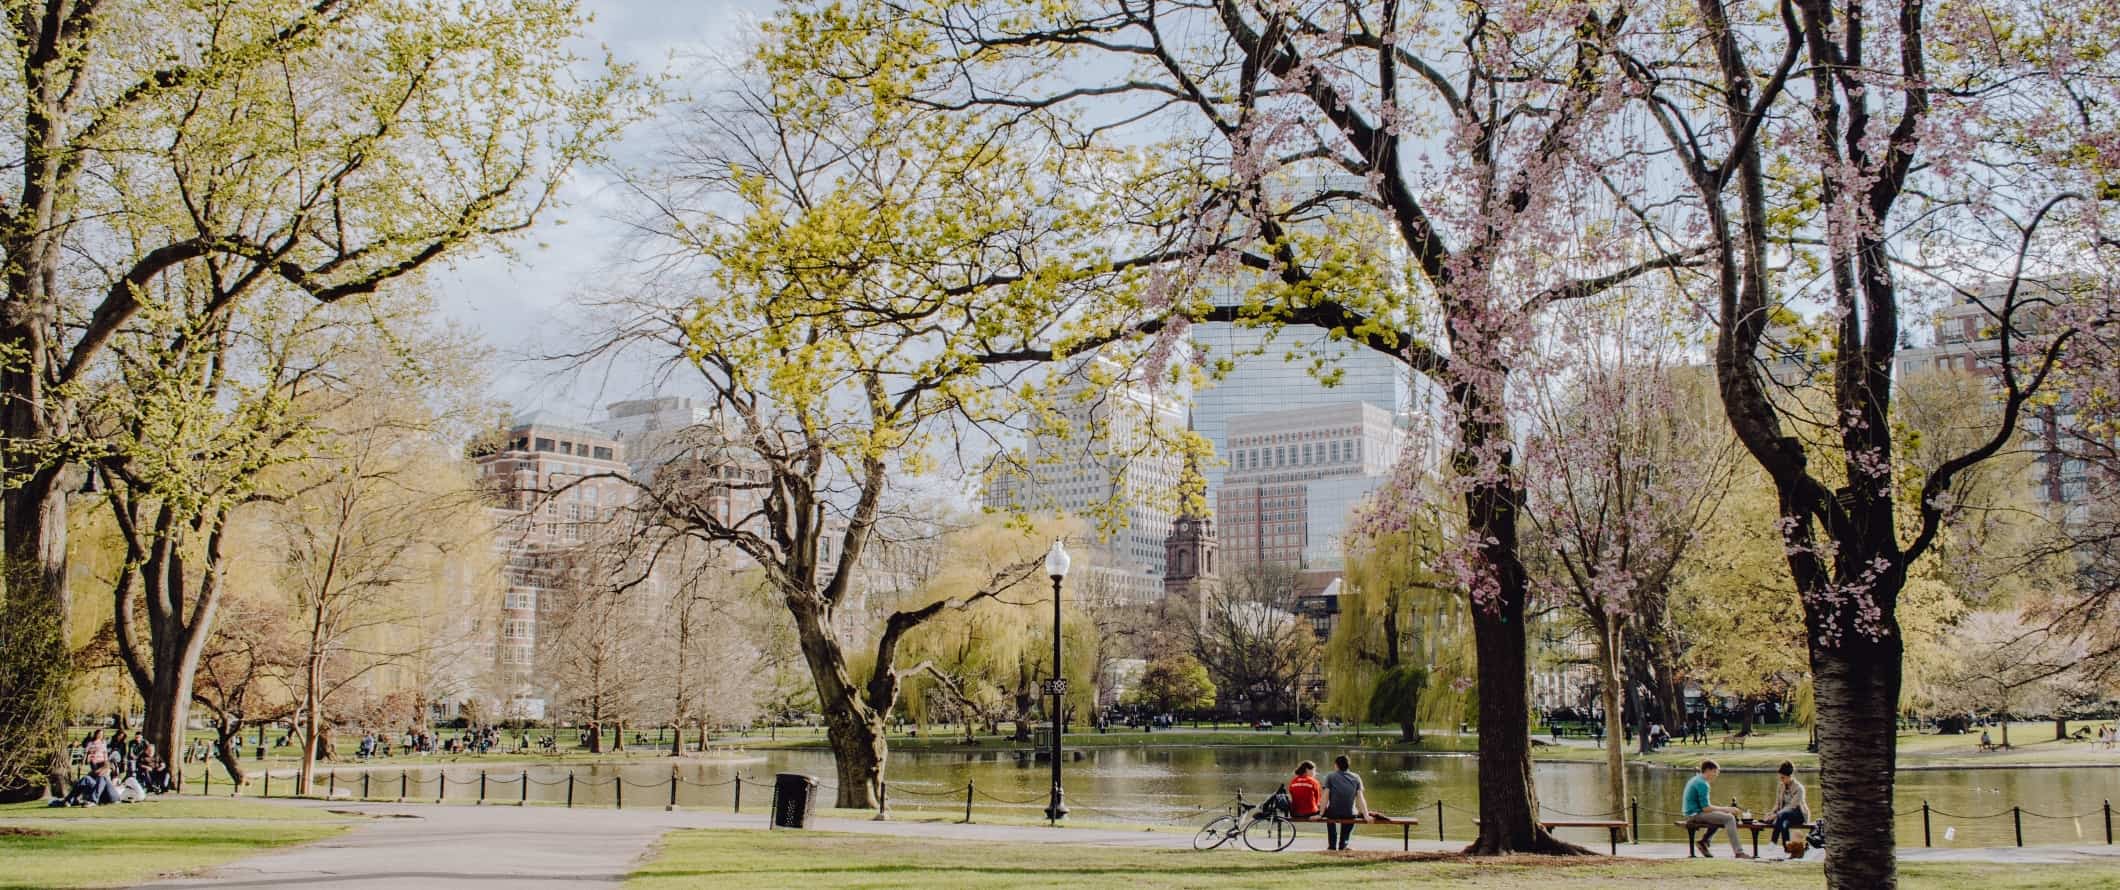 People sitting around a pond with cherry blossoms in bloom and buildings in the distance in Boston Public Garden in Boston, Massachusetts.